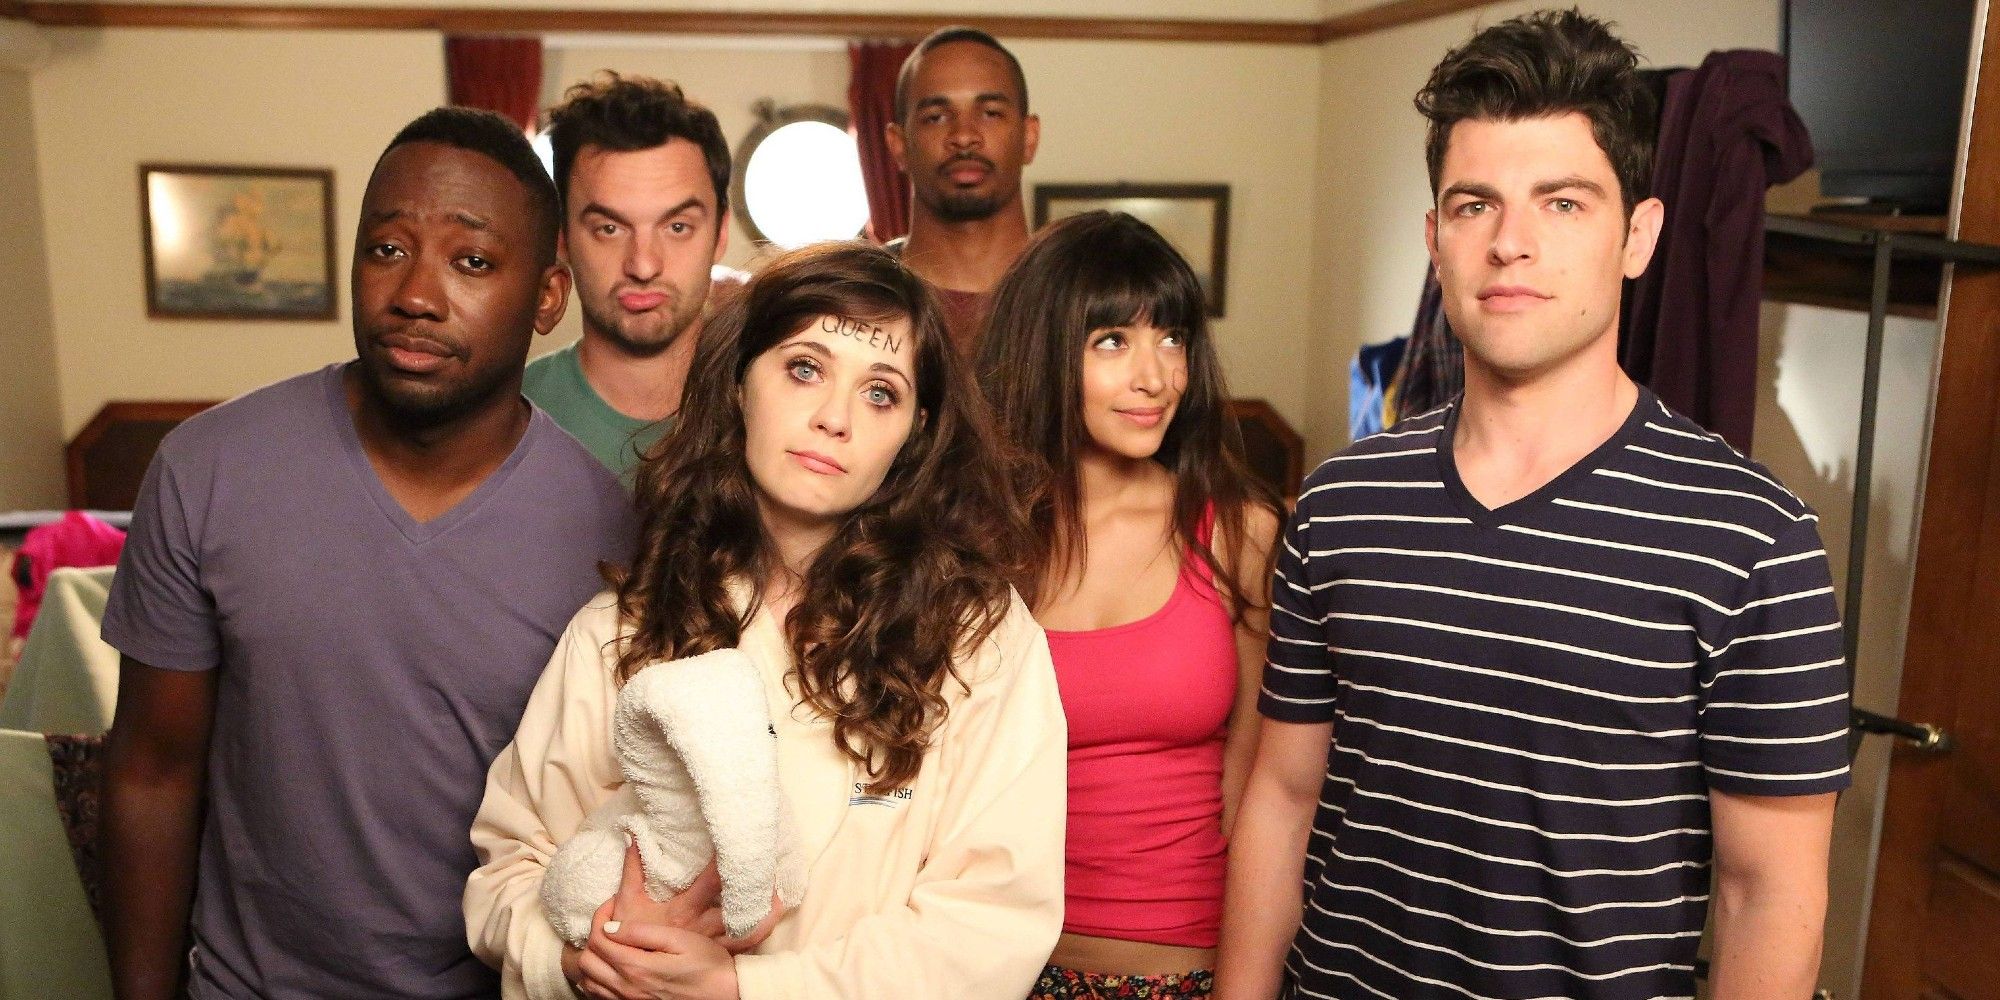 The New Girl cast stands in the doorway of their cabin in the season three finale Cruise after having been locked in for several days